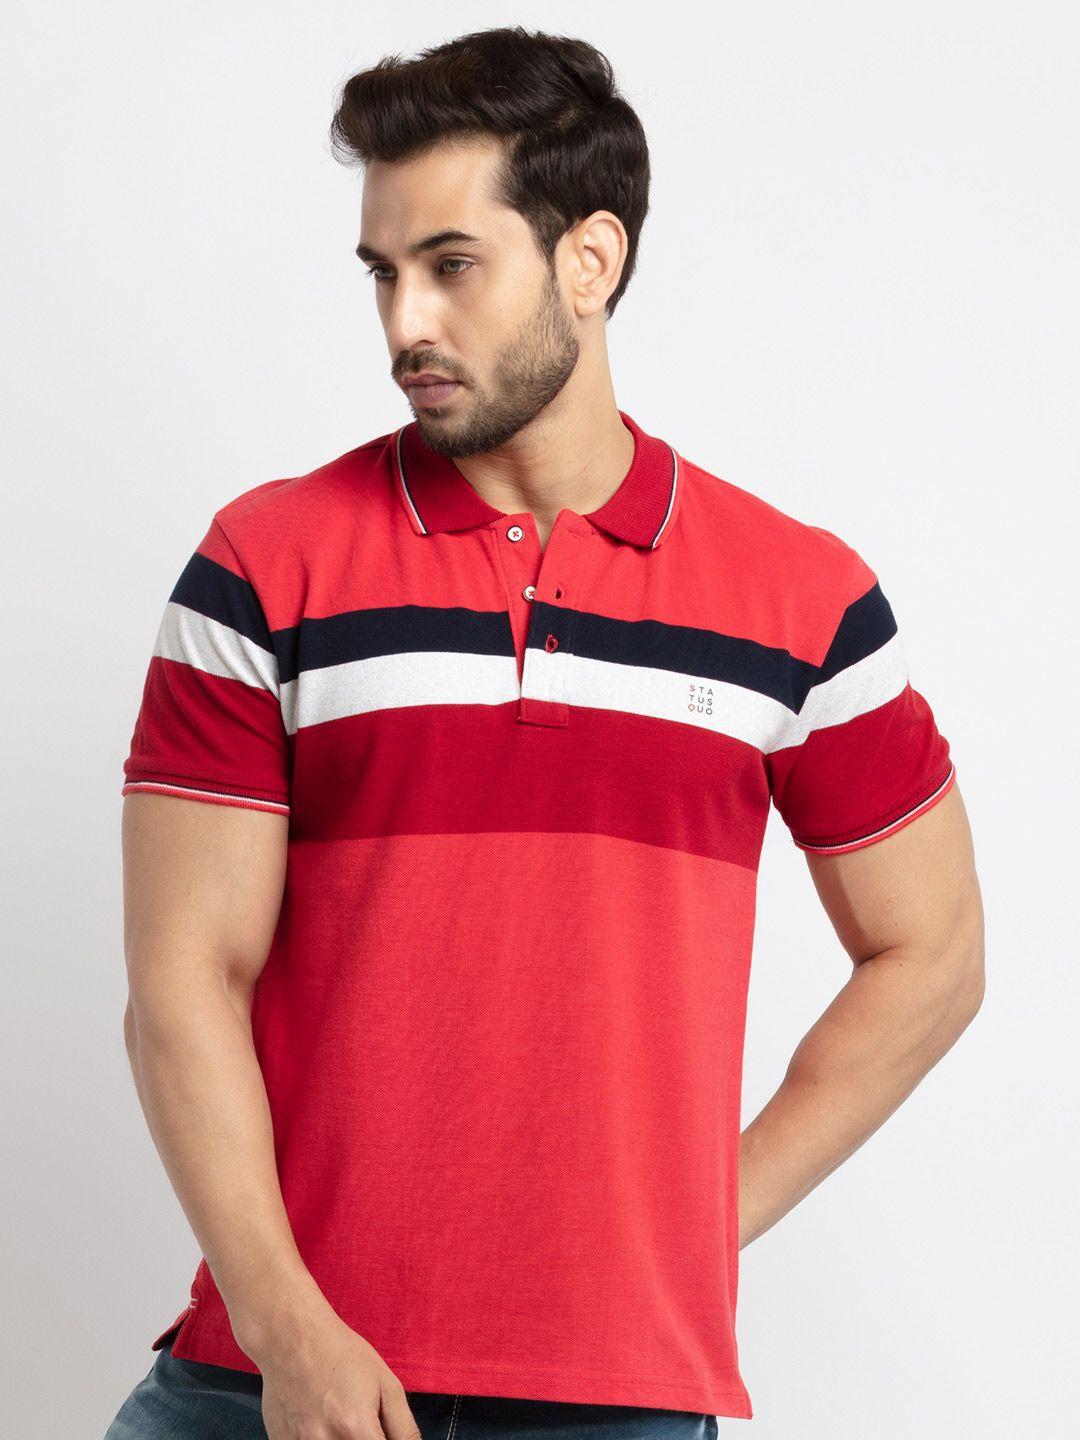 status-quo-men-coral-&-maroon-striped-polo-collar-t-shirt